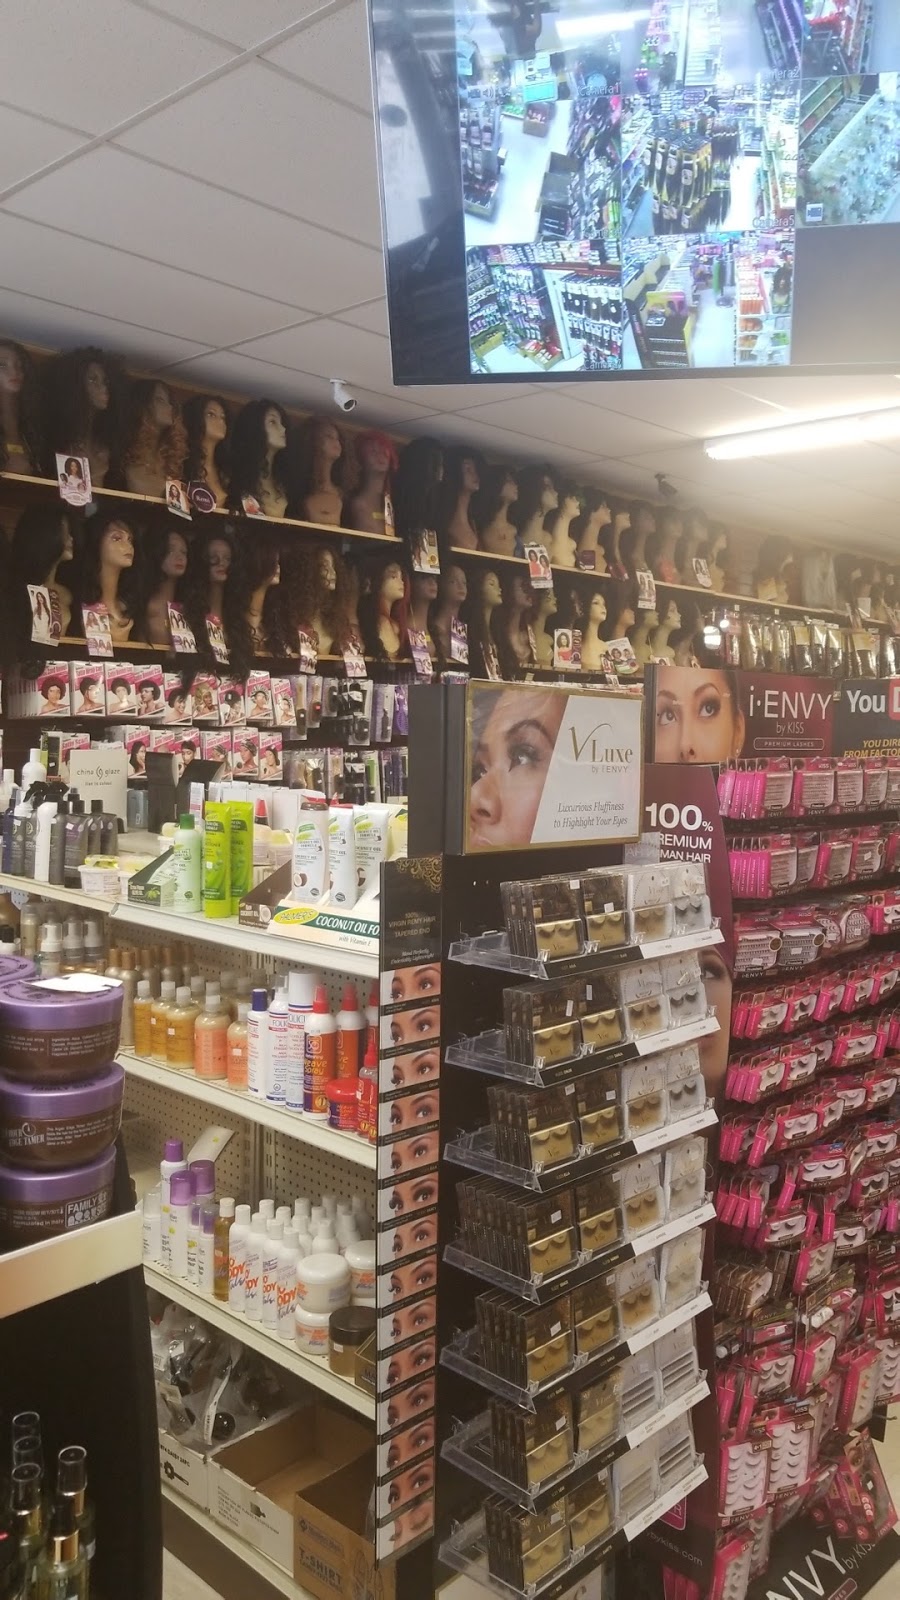 Unique beauty supply | 5416 Rock Quarry Rd #105, Raleigh, NC 27610, USA | Phone: (919) 803-4577